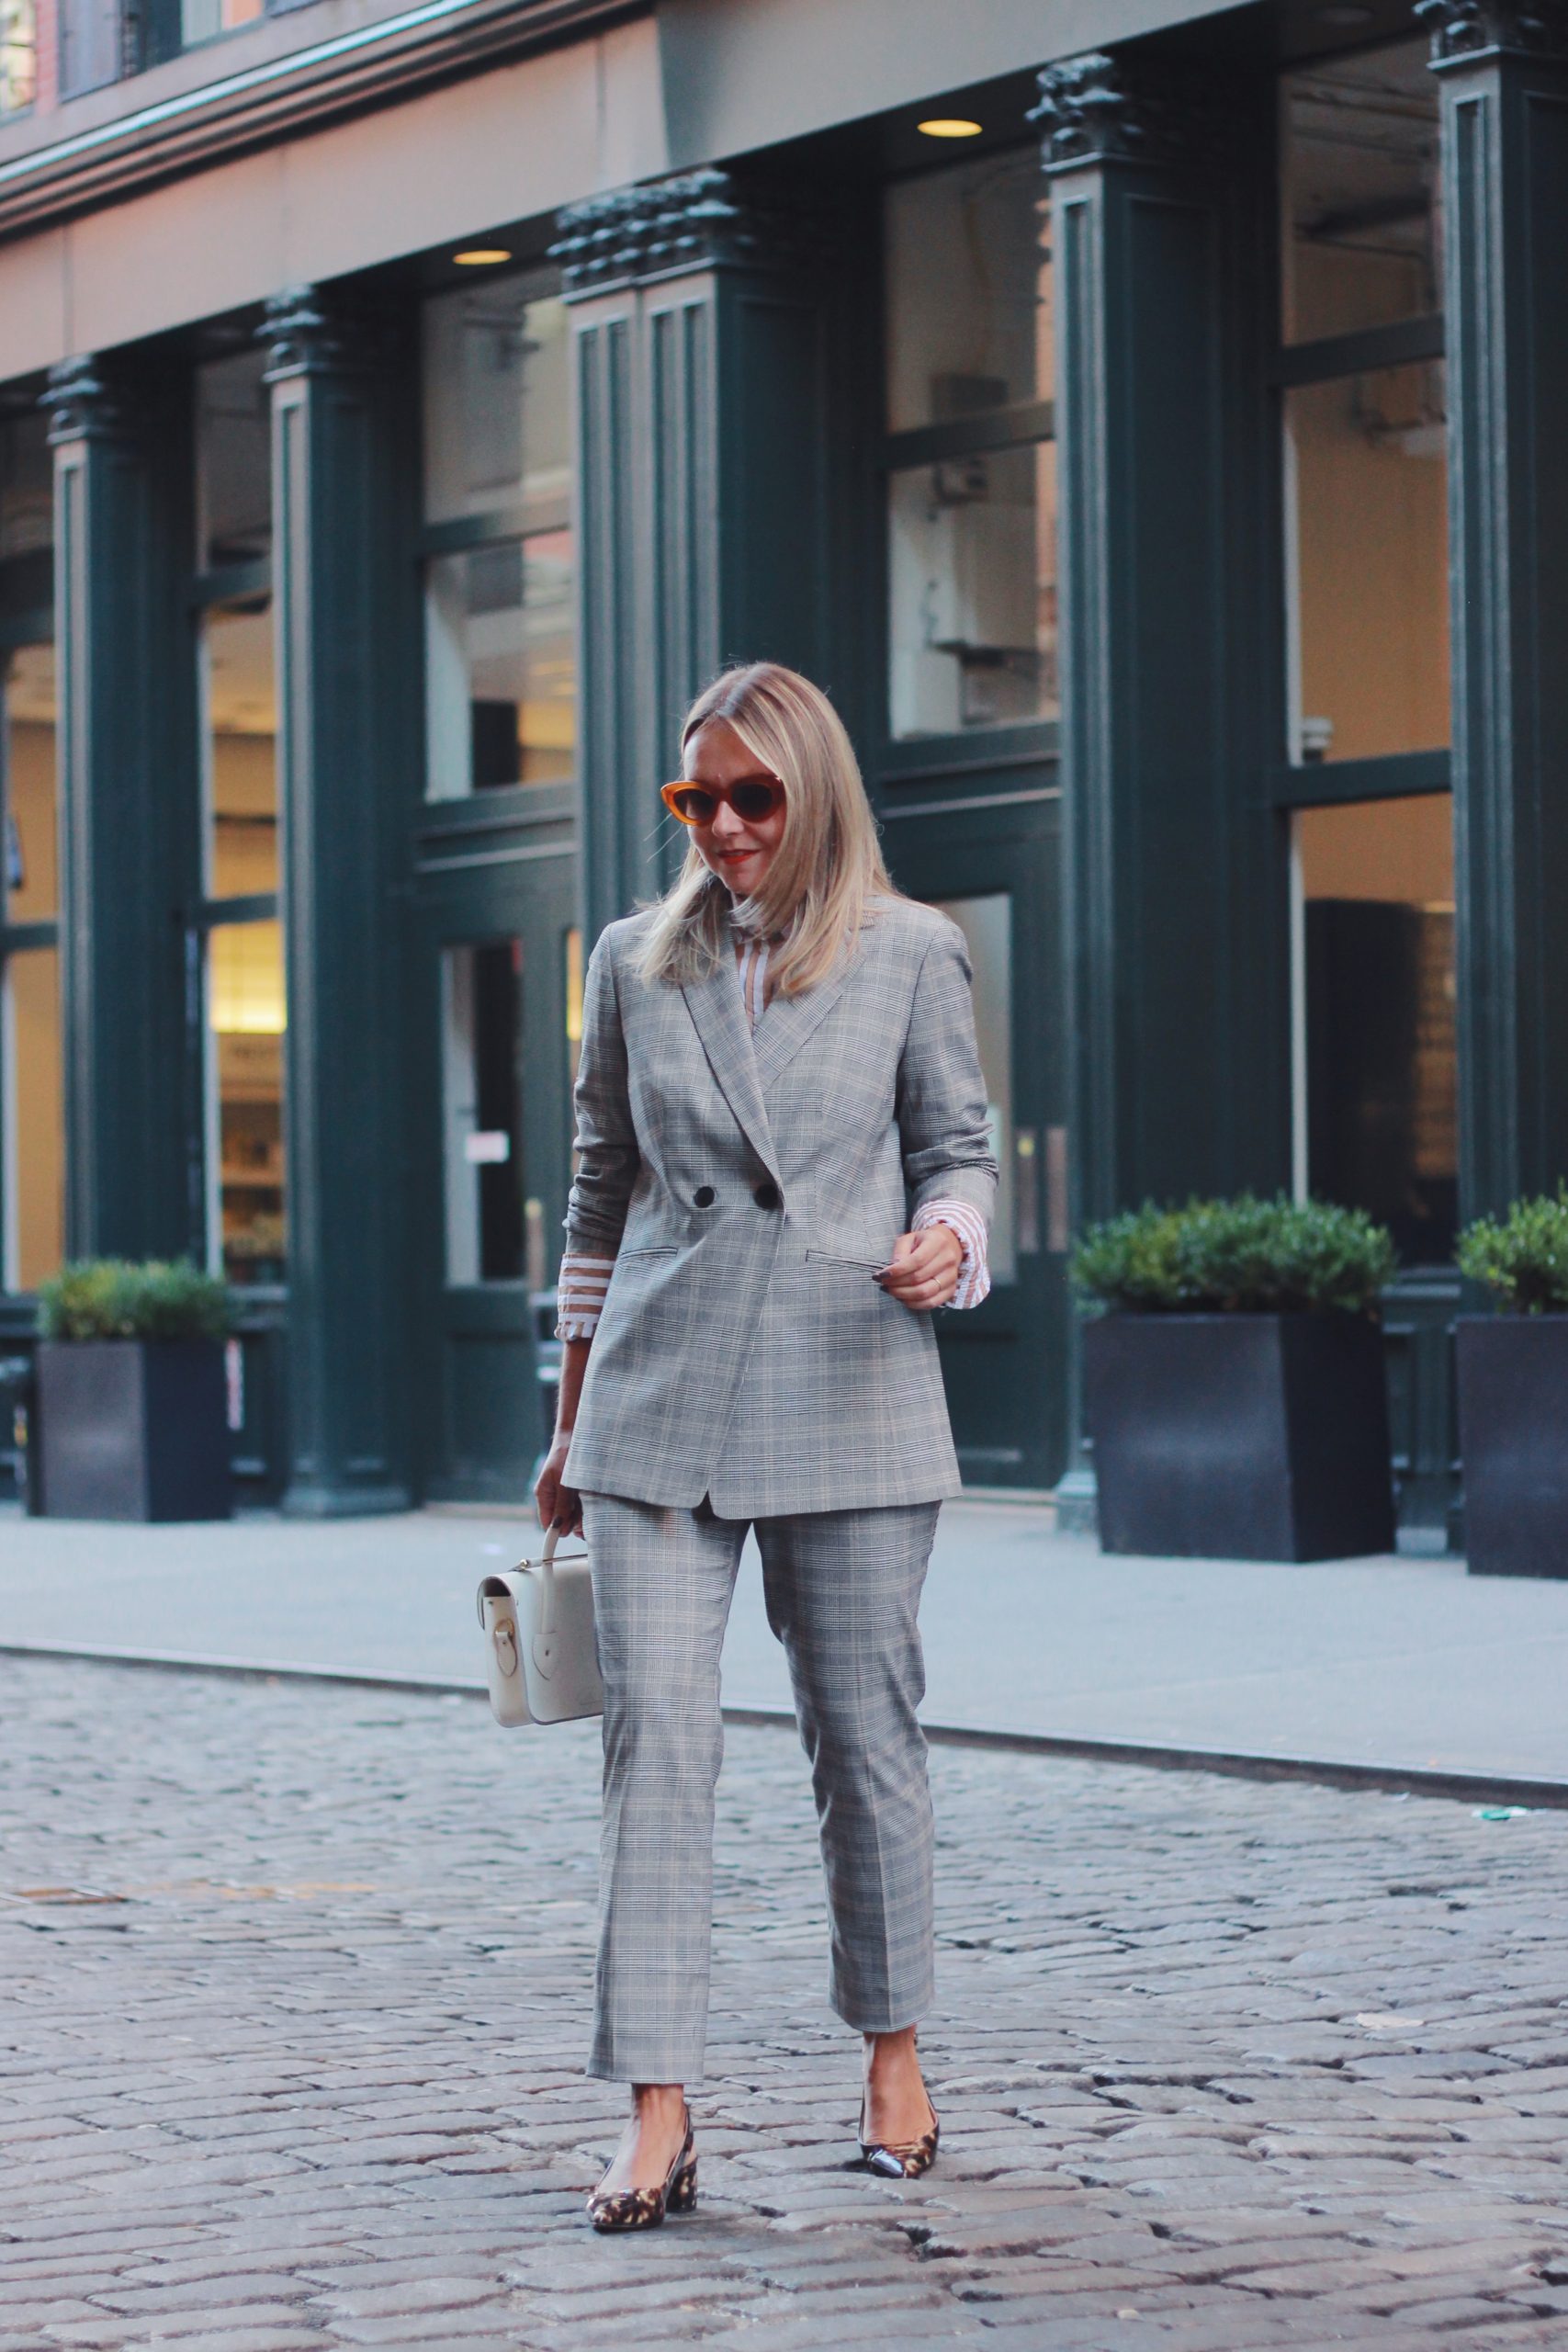 How to style pants? 6 outfit ideas for working women